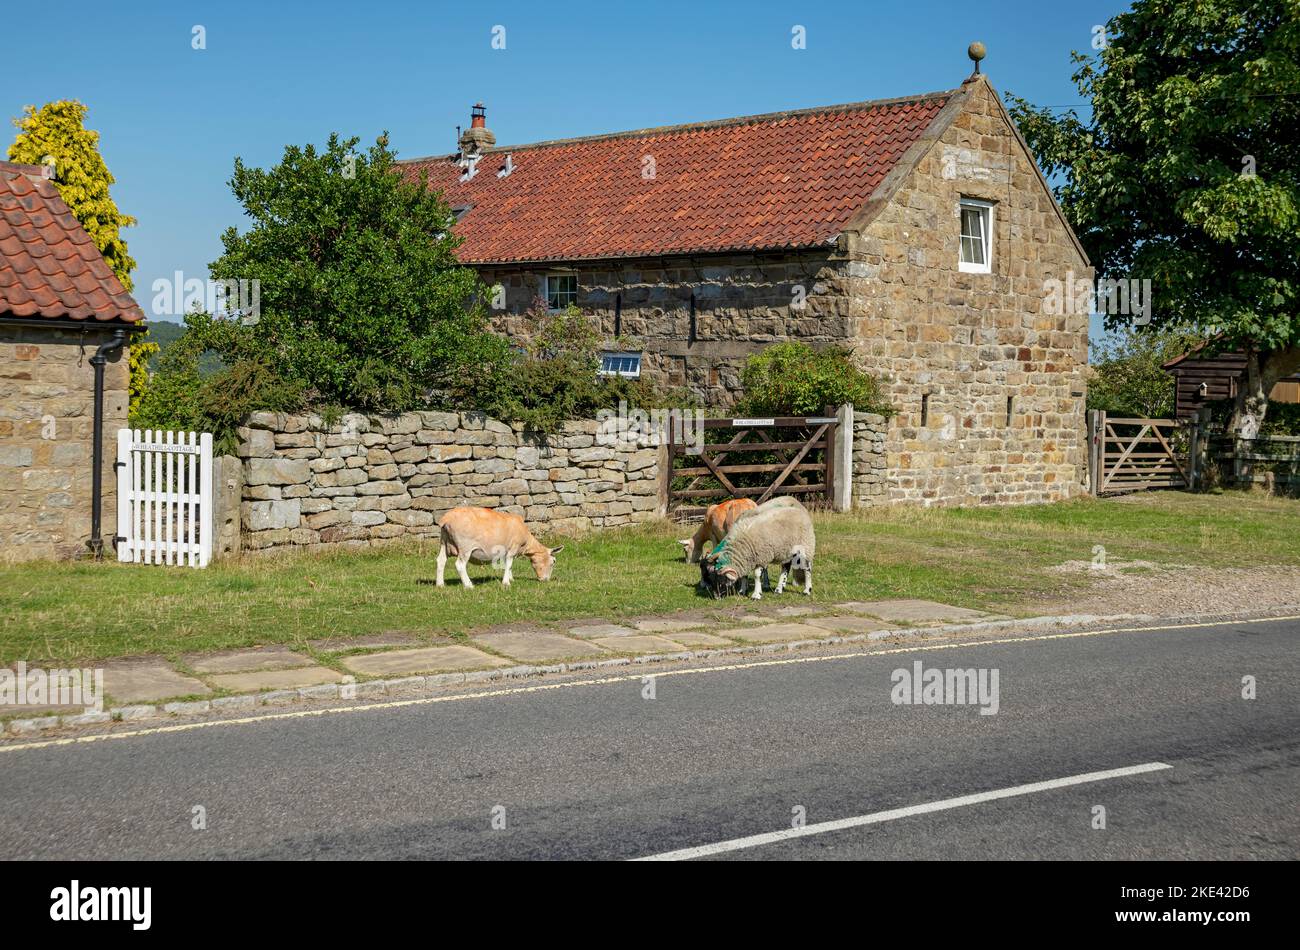 Sheep grazing on grass verge in the village cottages cottage farm house in summer Goathland North York Moors National Park North Yorkshire England UK Stock Photo